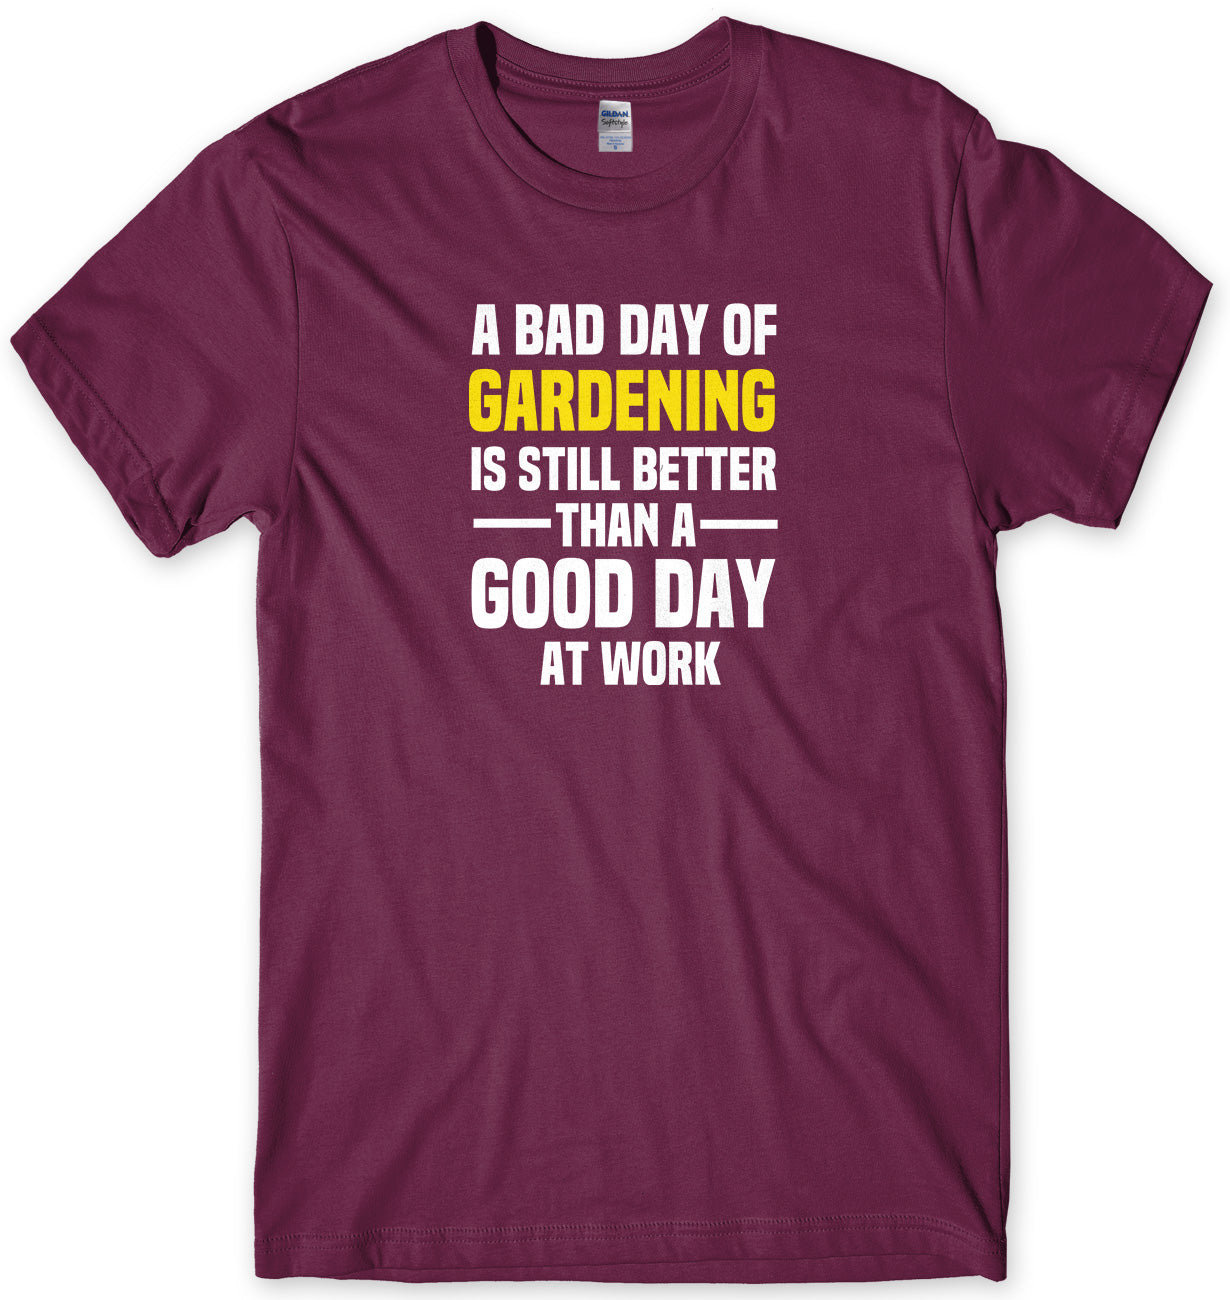 A BAD DAY OF GARDENING IS STILL BETTER THAN A GOOD DAY AT WORK MENS FUNNY SLOGAN UNISEX T-SHIRT - StreetSide Surgeons